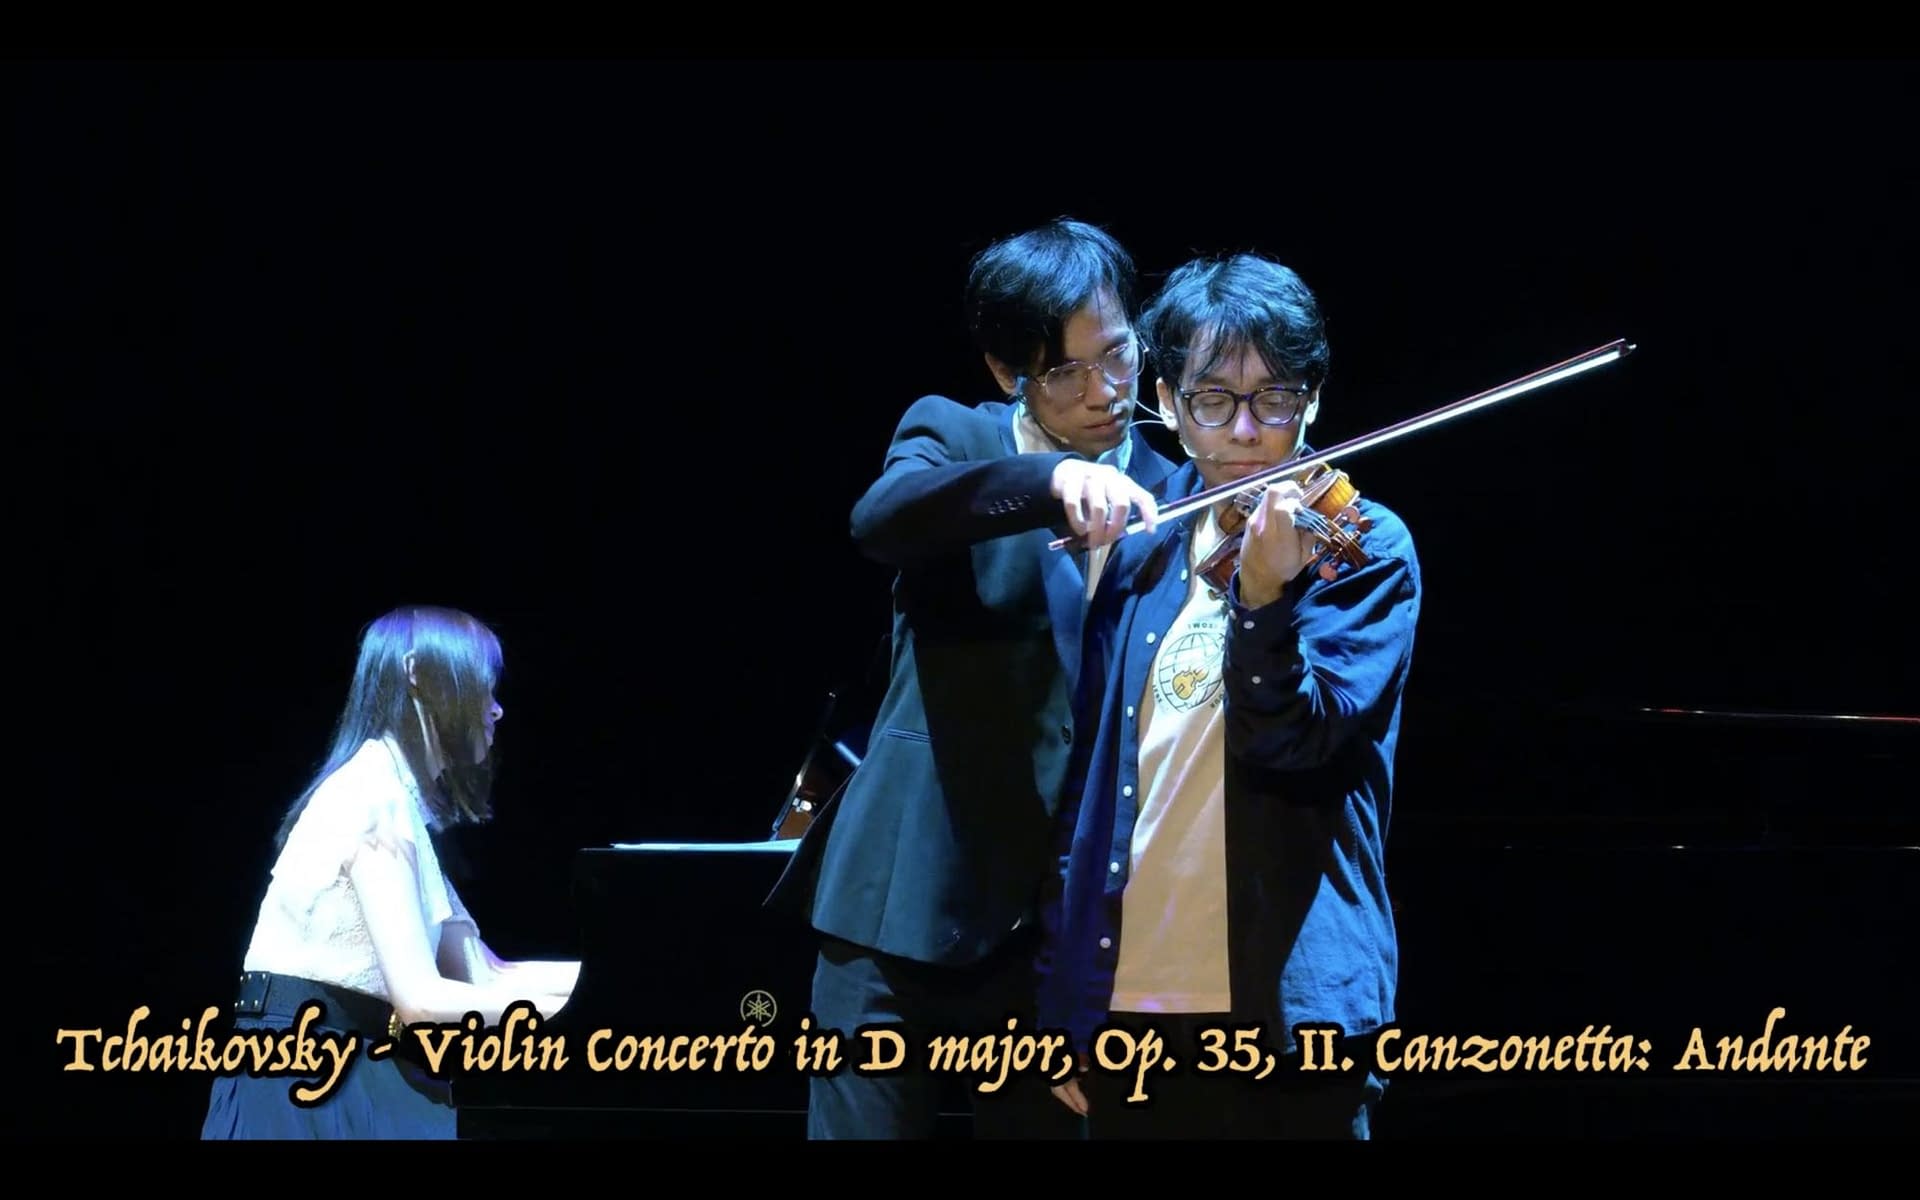 TwoSet Violin Takes Classical Education Virtual with World Tour